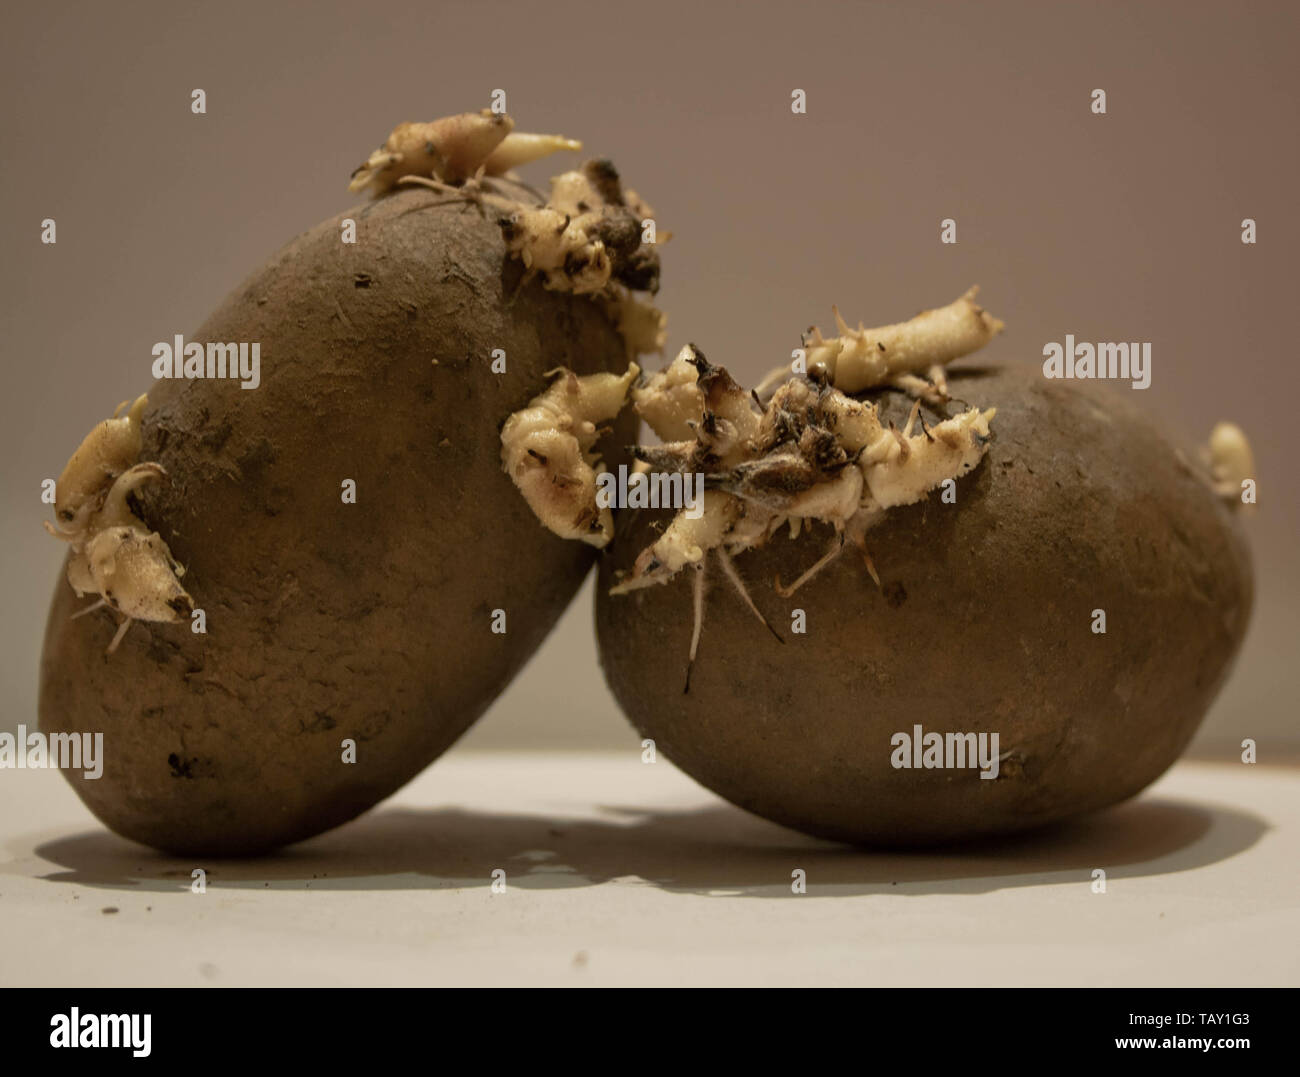 Two potatoes with white sprouts on a light background. Stock Photo